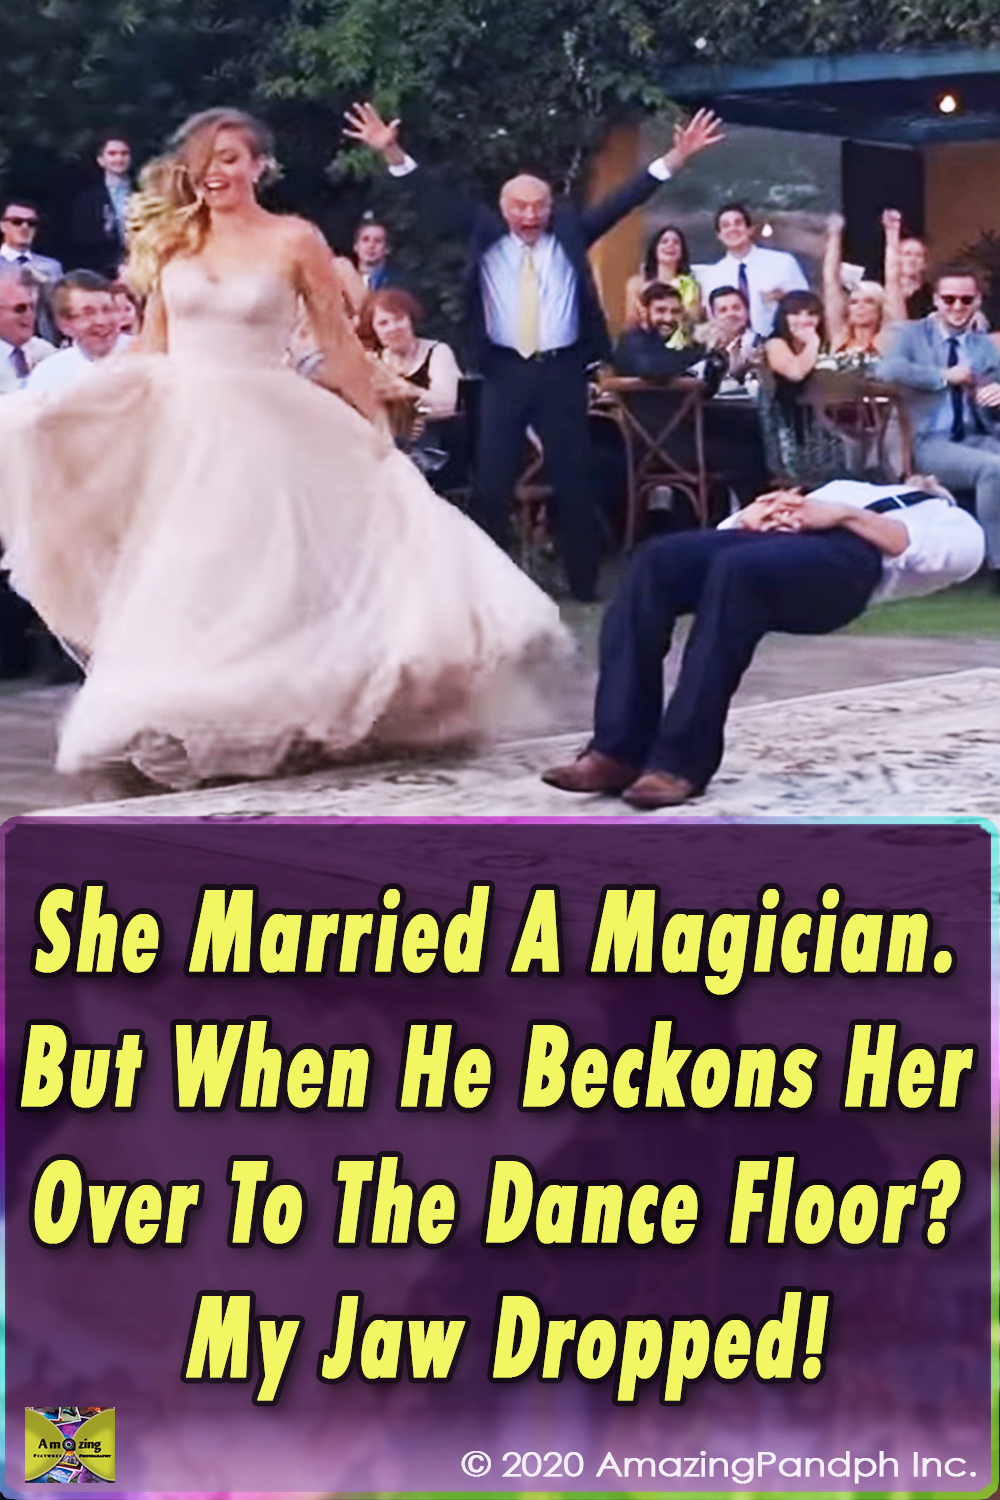 justin willman, jillian sipkins, magic, magician, first dance, wedding, amazing, funny, best first dance ever, wedding video, spell on you, levitation,live show,wedding ceremony,viral video,viral,married,just married,magicien husband